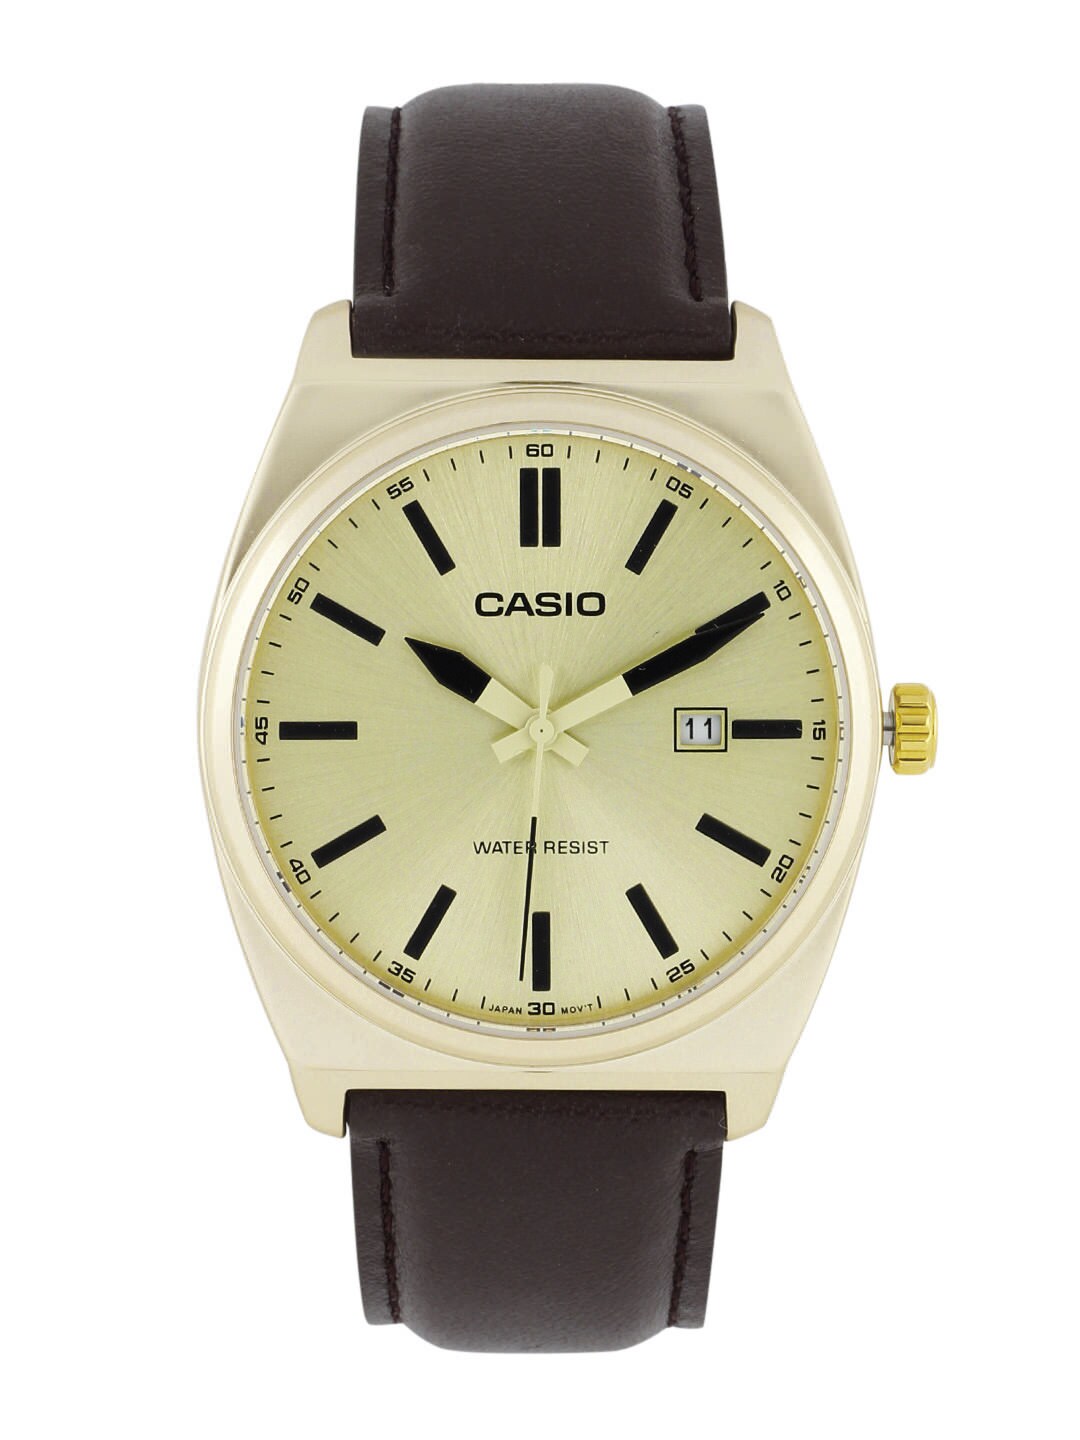 CASIO ENTICER Men Gold-Toned Dial Analogue Watch A644